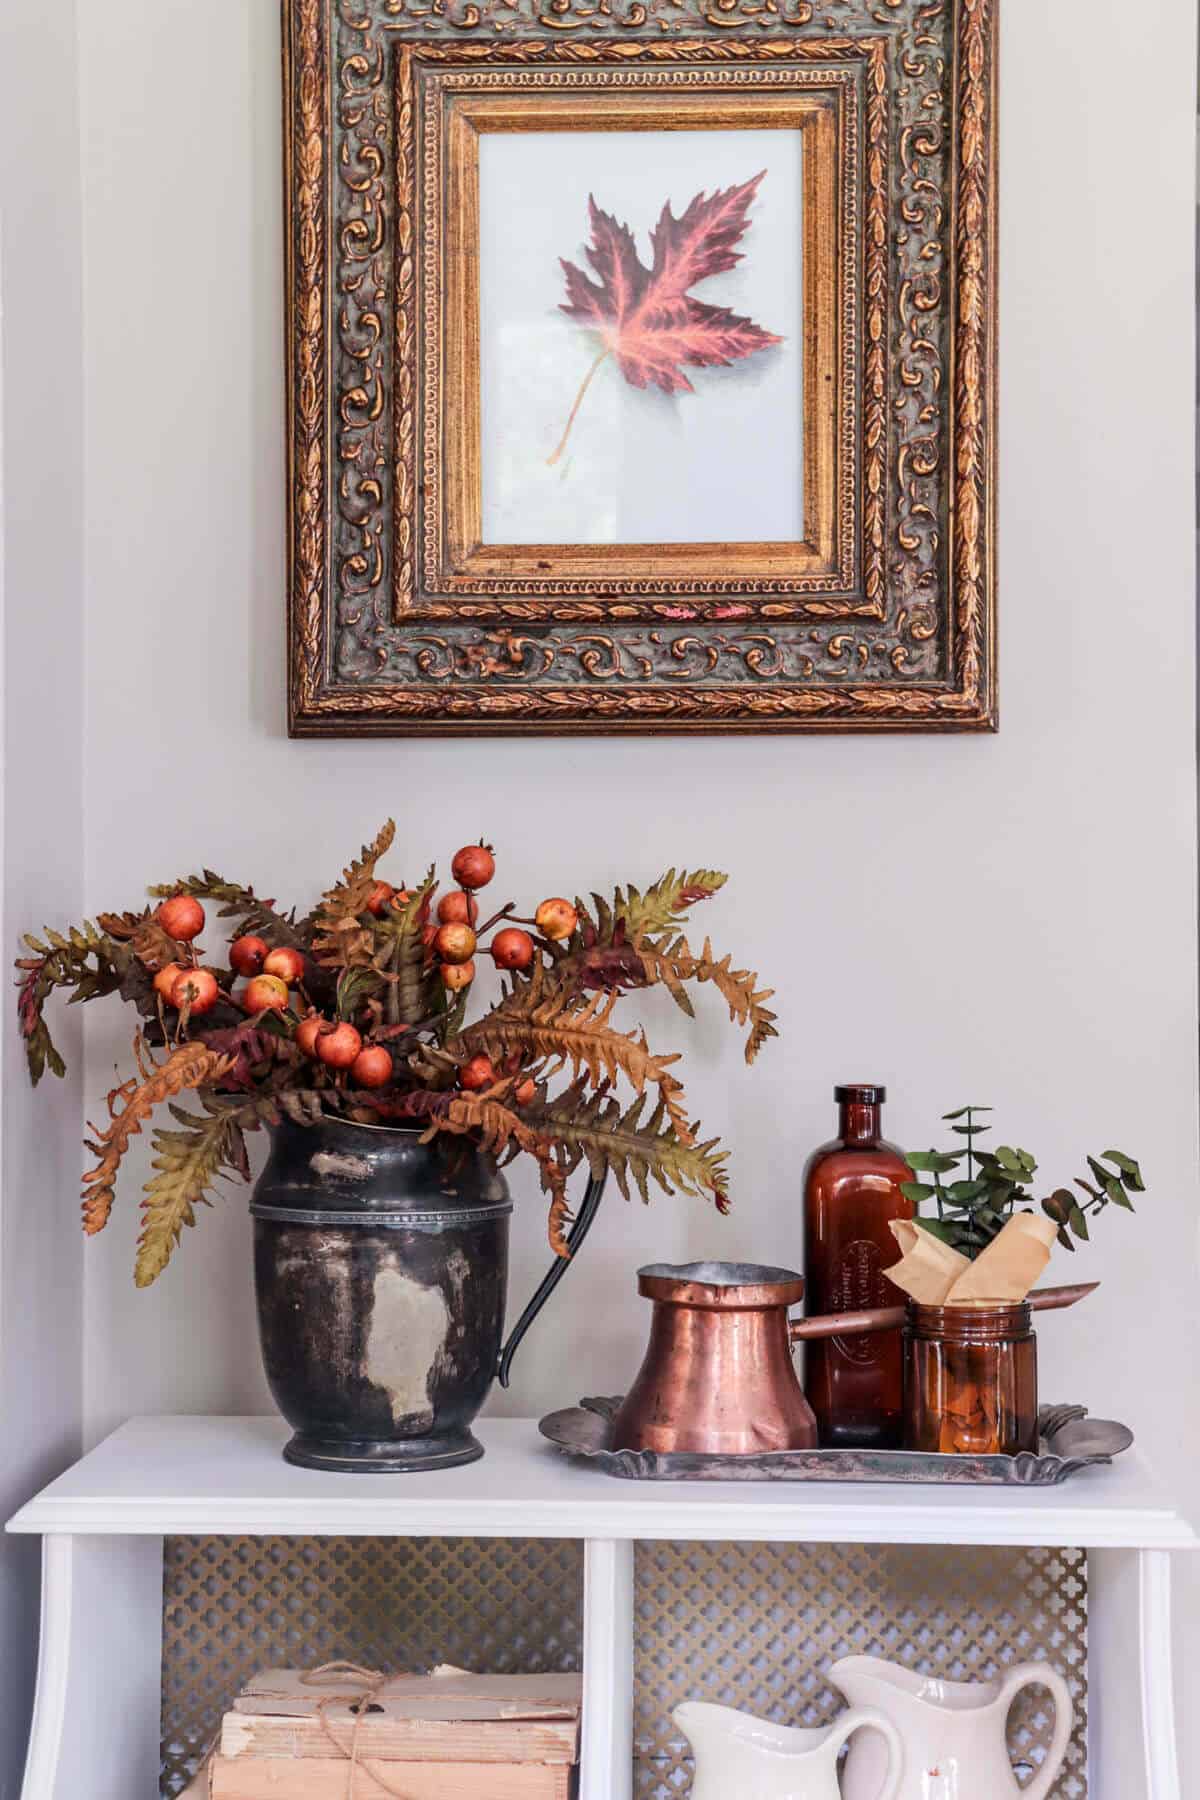 Celebrating Fall in our Entryway